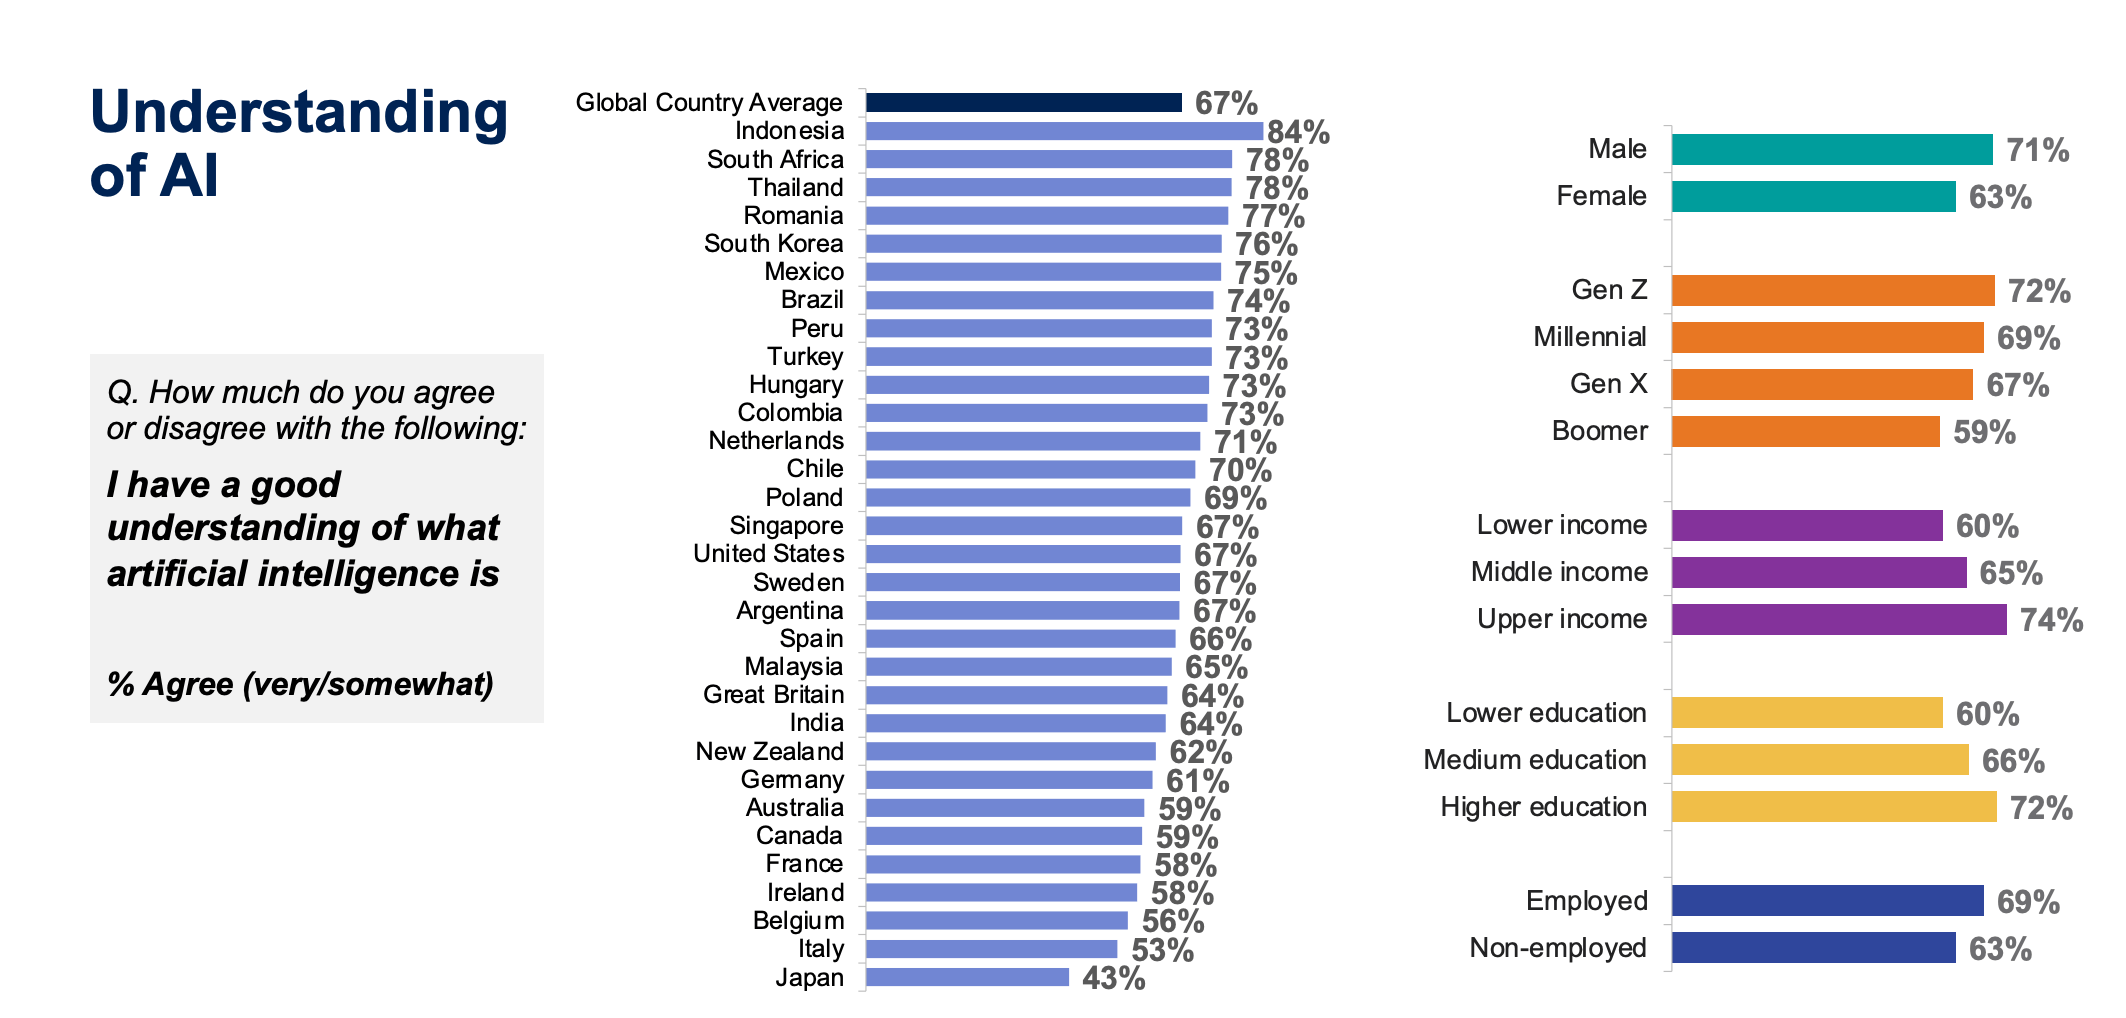 People Perception on AI across countries